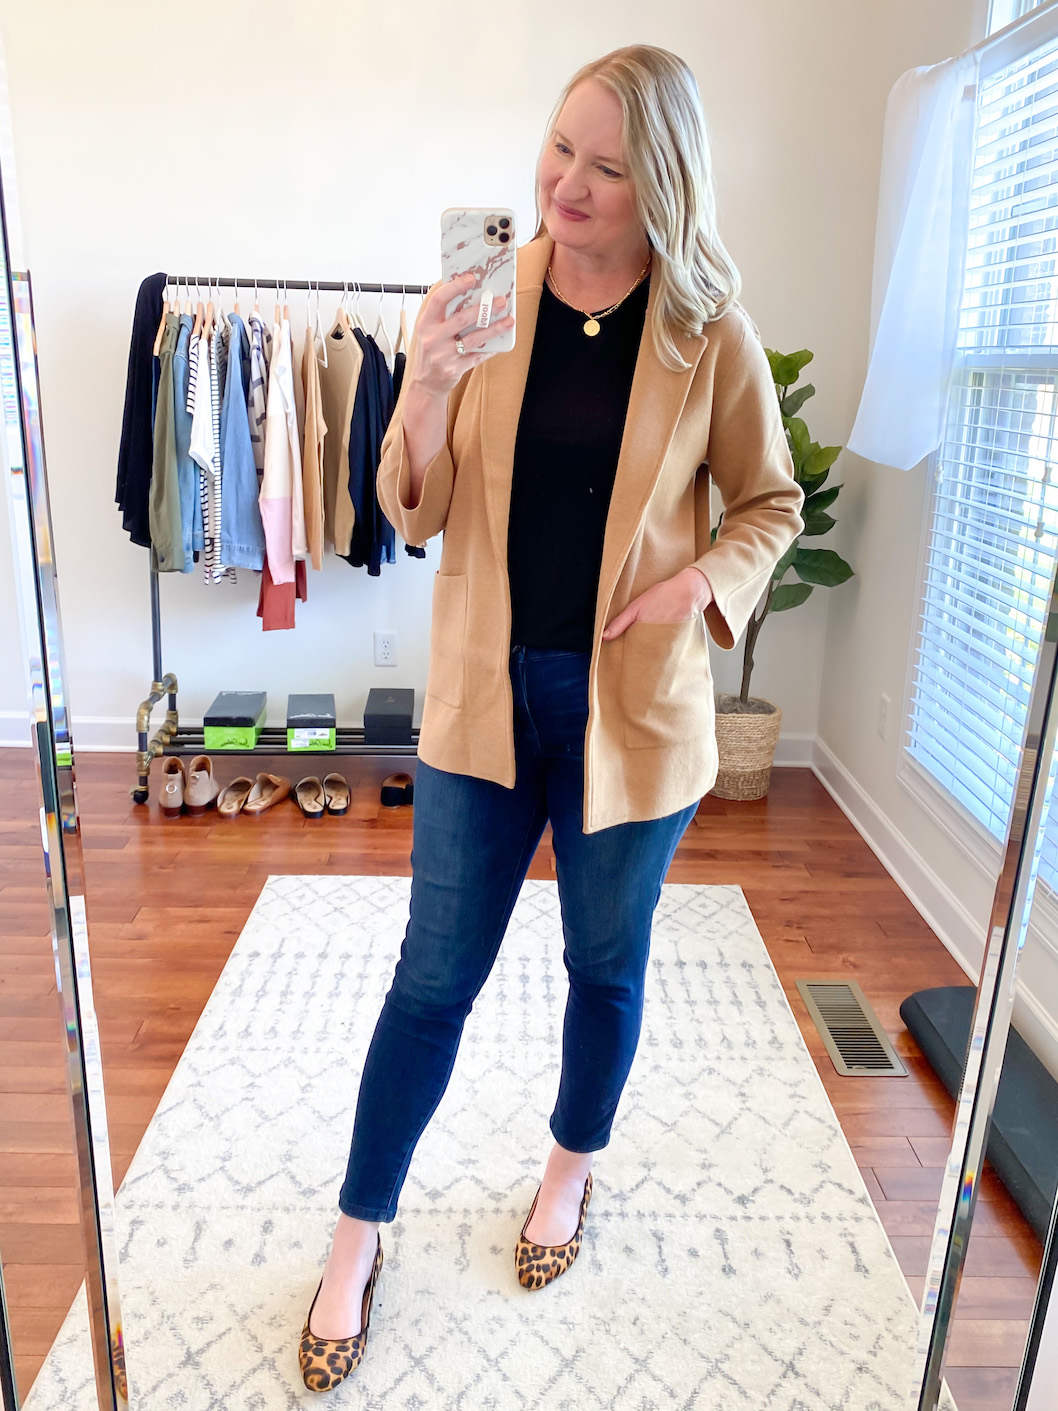 7 Trends To Add To Your Fall Closet - alittlebitetc